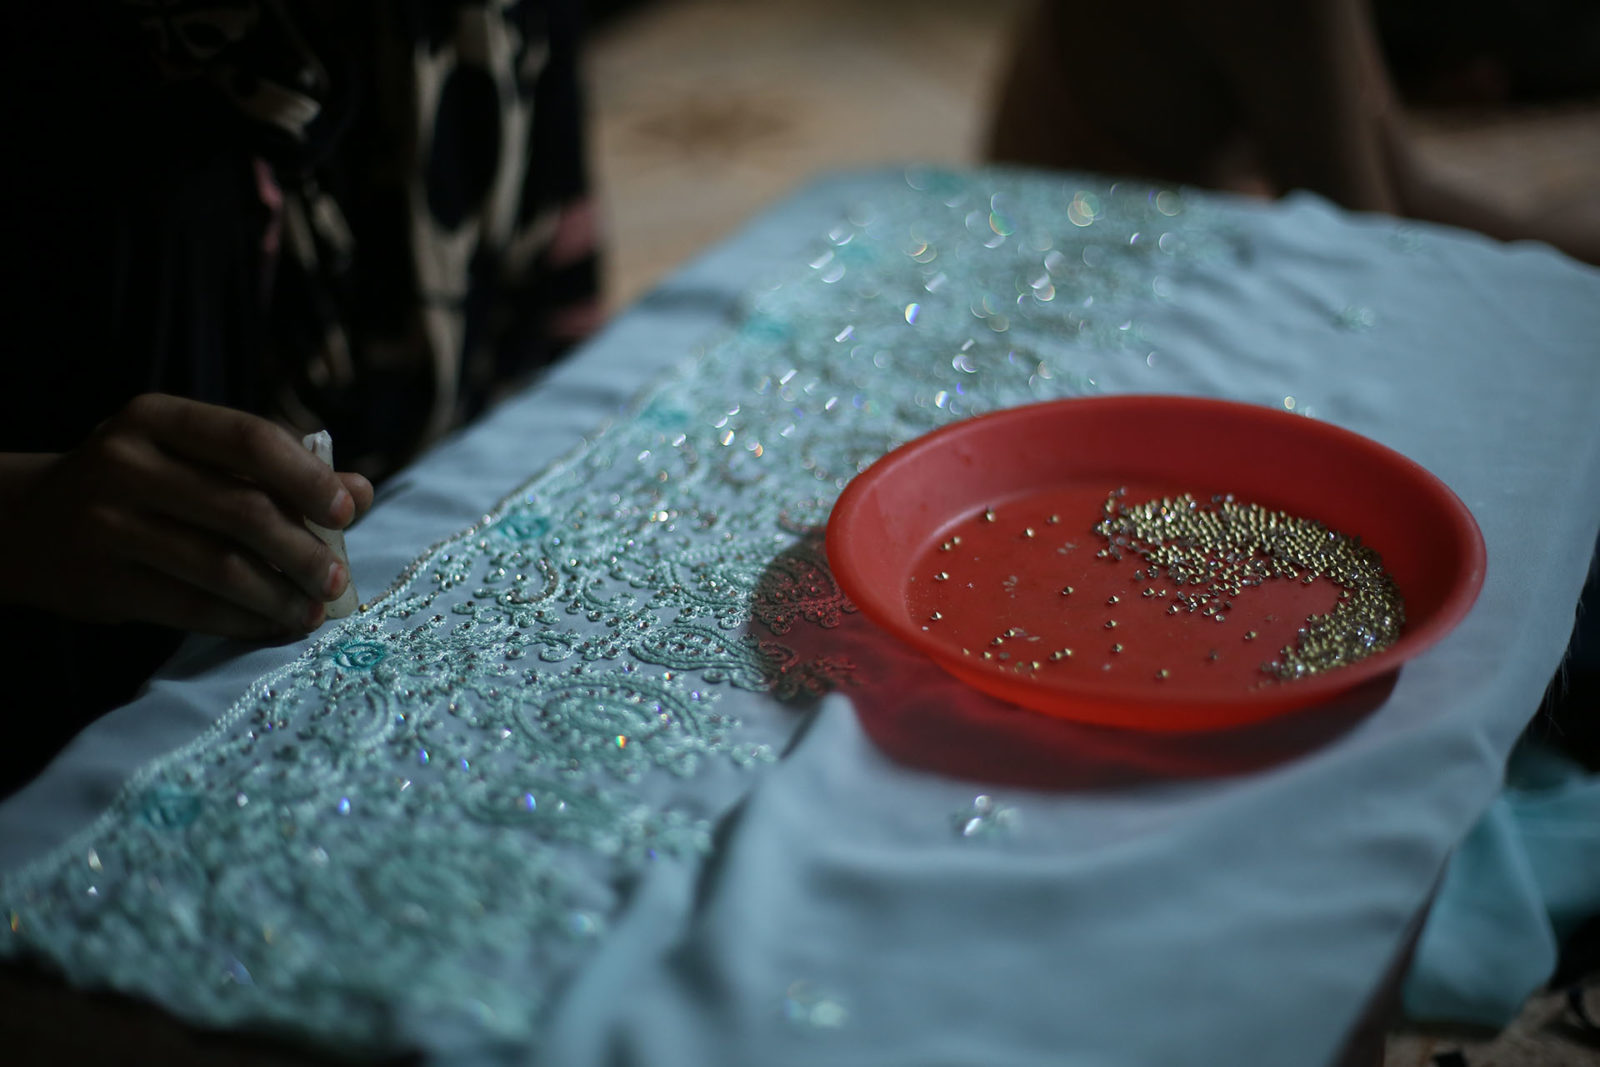 A photo of a person applying beads on an embroidered cloth